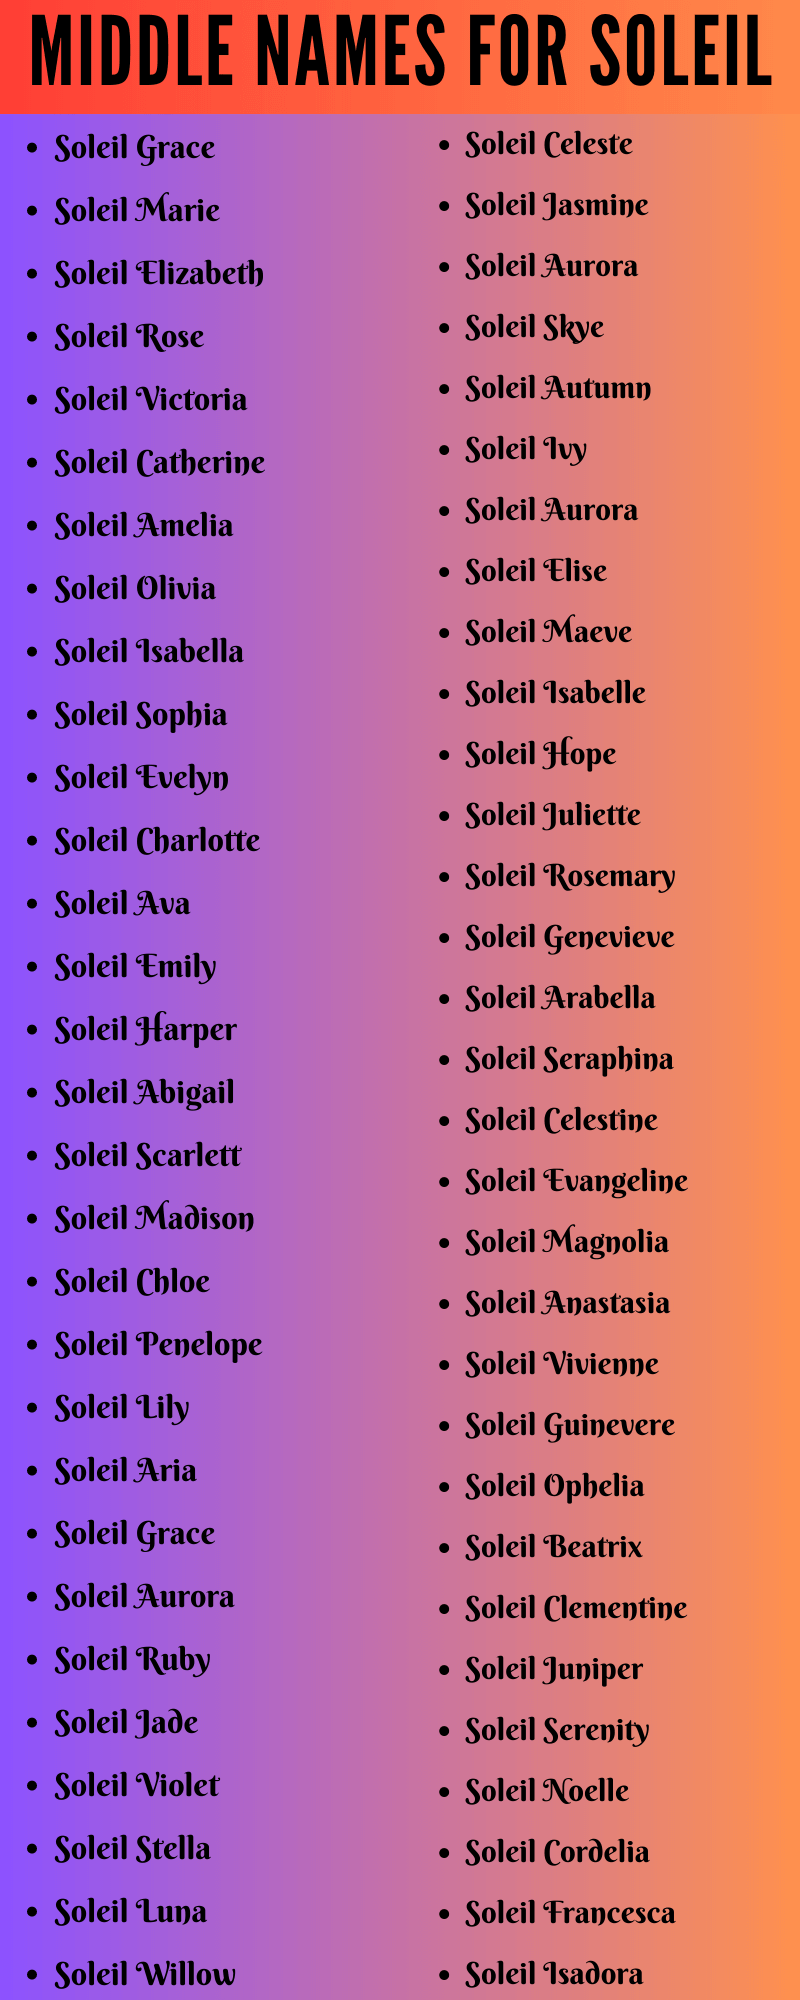 400 Best Middle Names For Soleil